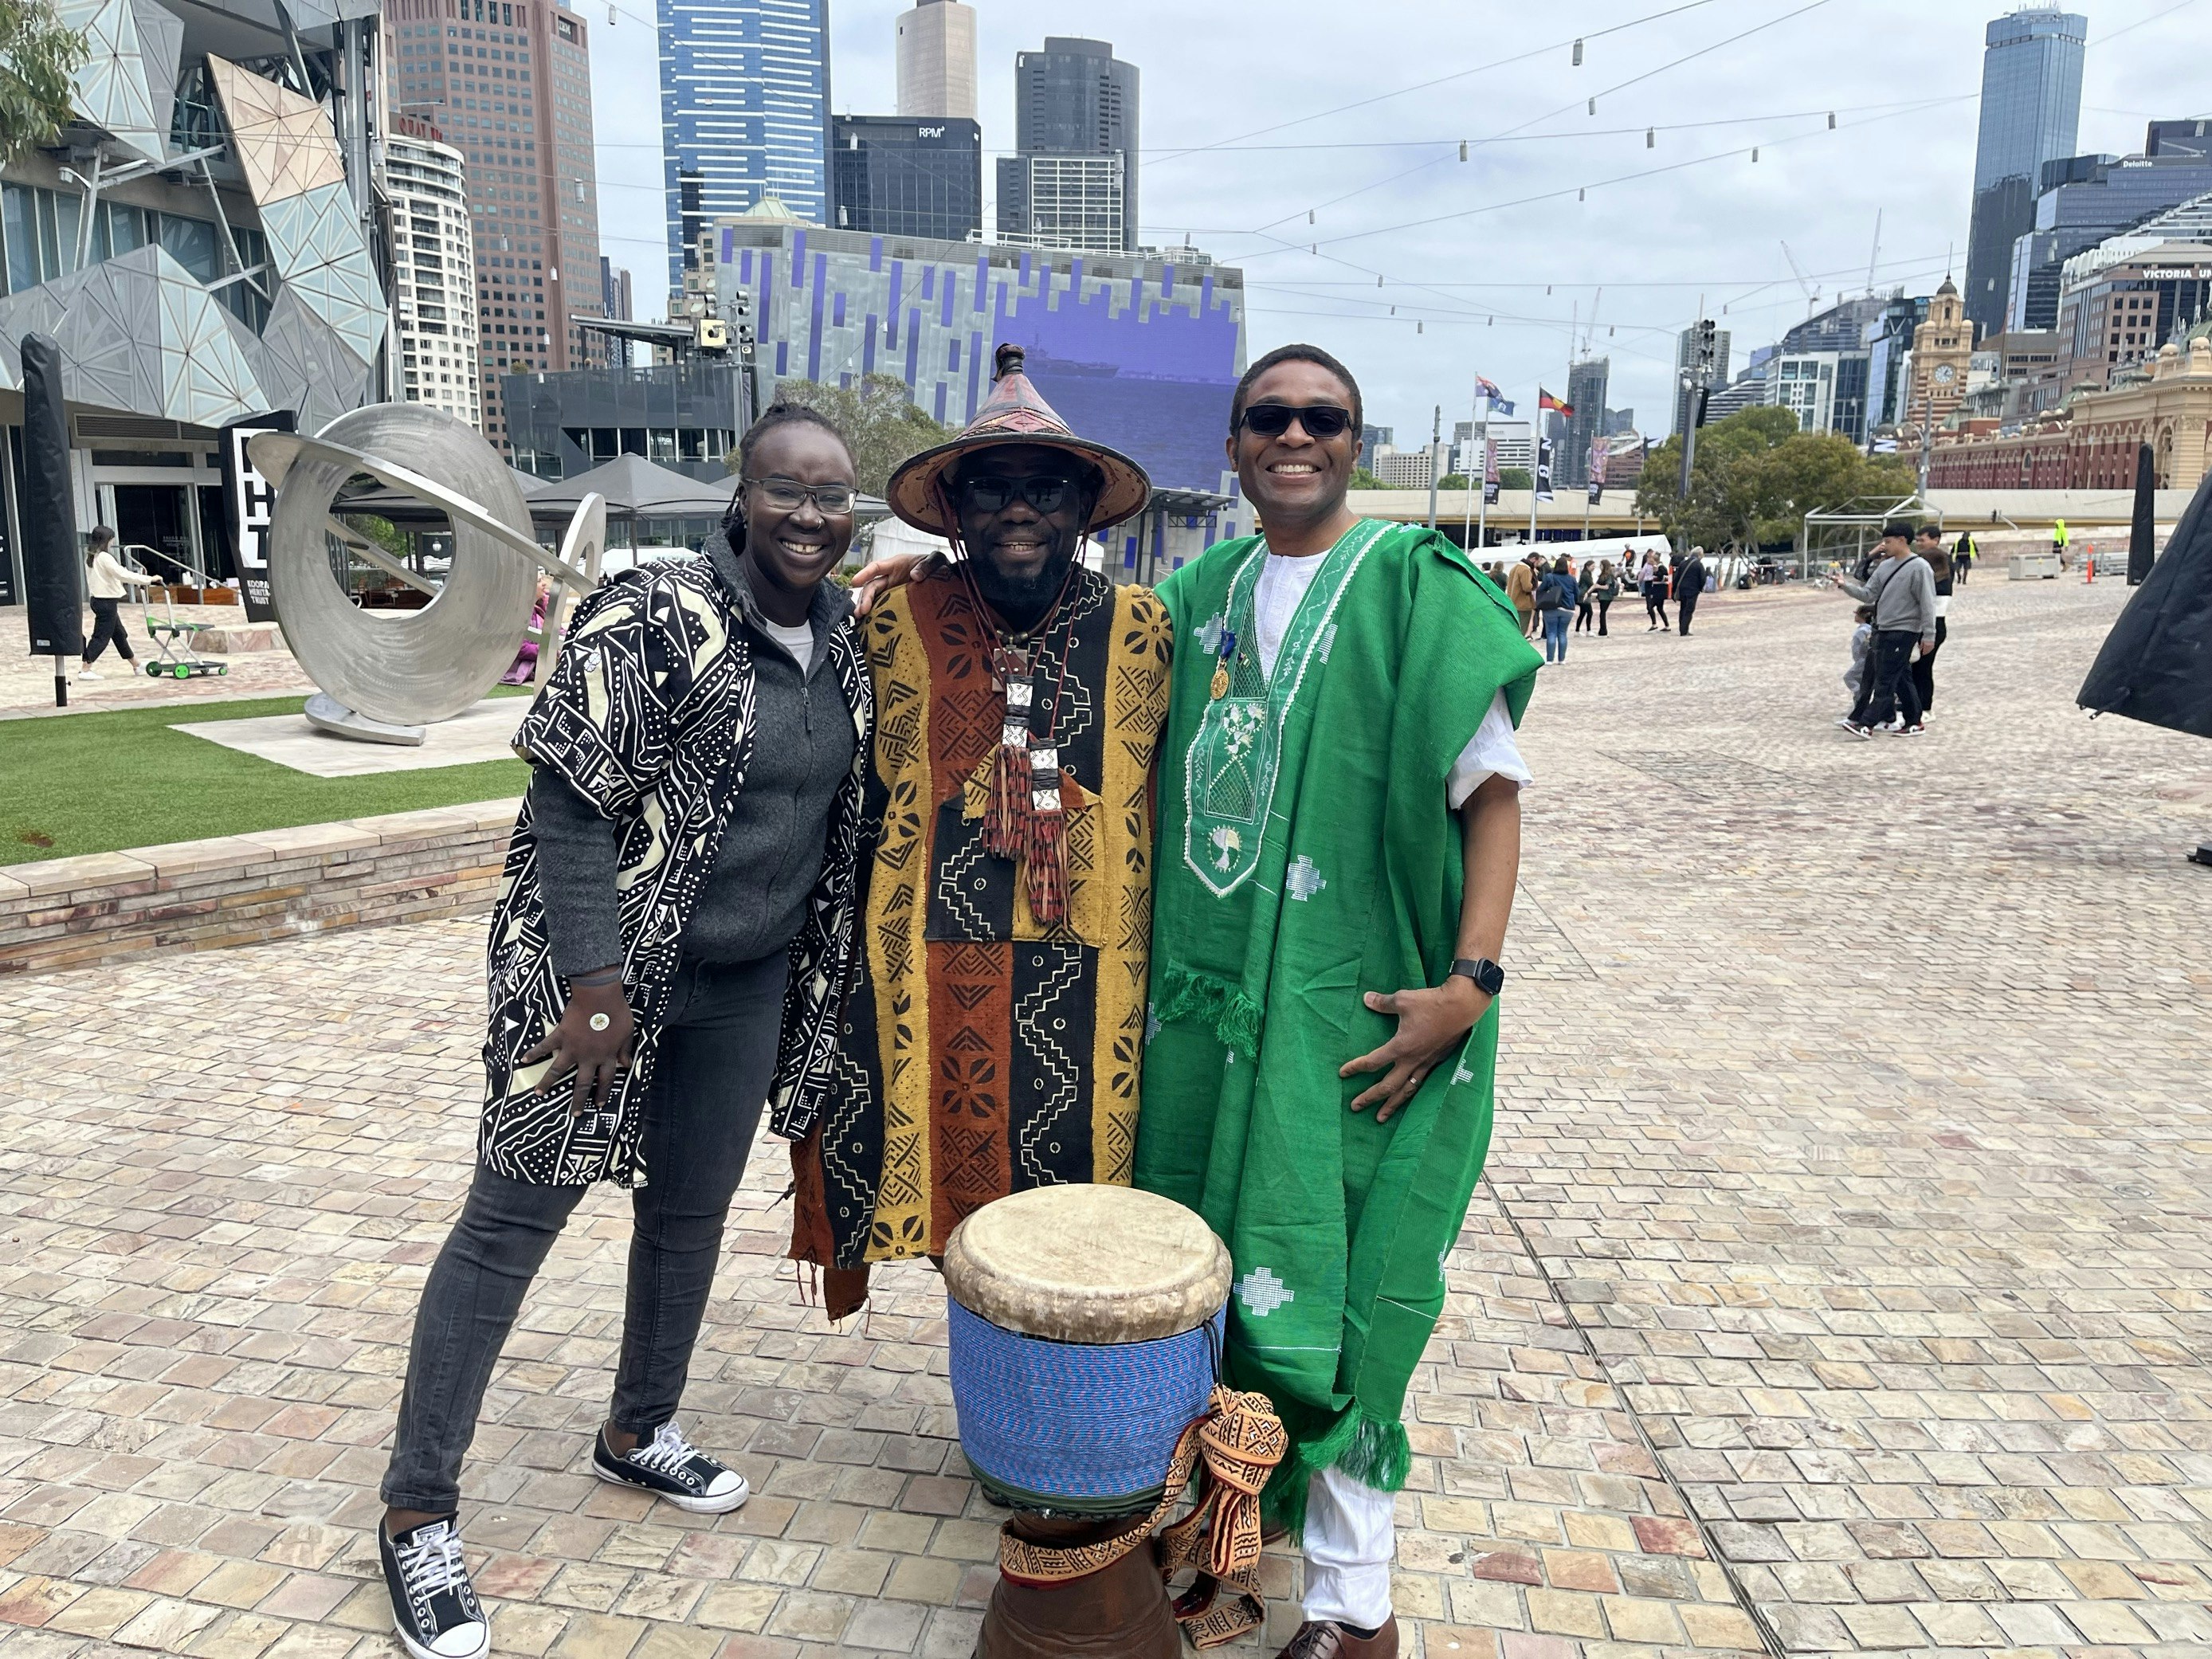 Poni Tungun, Kofi Kunkpe and Fred Alale AM at Fed Square. Poni is on the left, wearing a patterned black and white jacet, Kofi is in the centre, with an African drum in front of him, and wears a hat and traditional costume. Fred is on the right, and wears bright green robes and sunglasses. The Fed Square Big Screen is behind them.